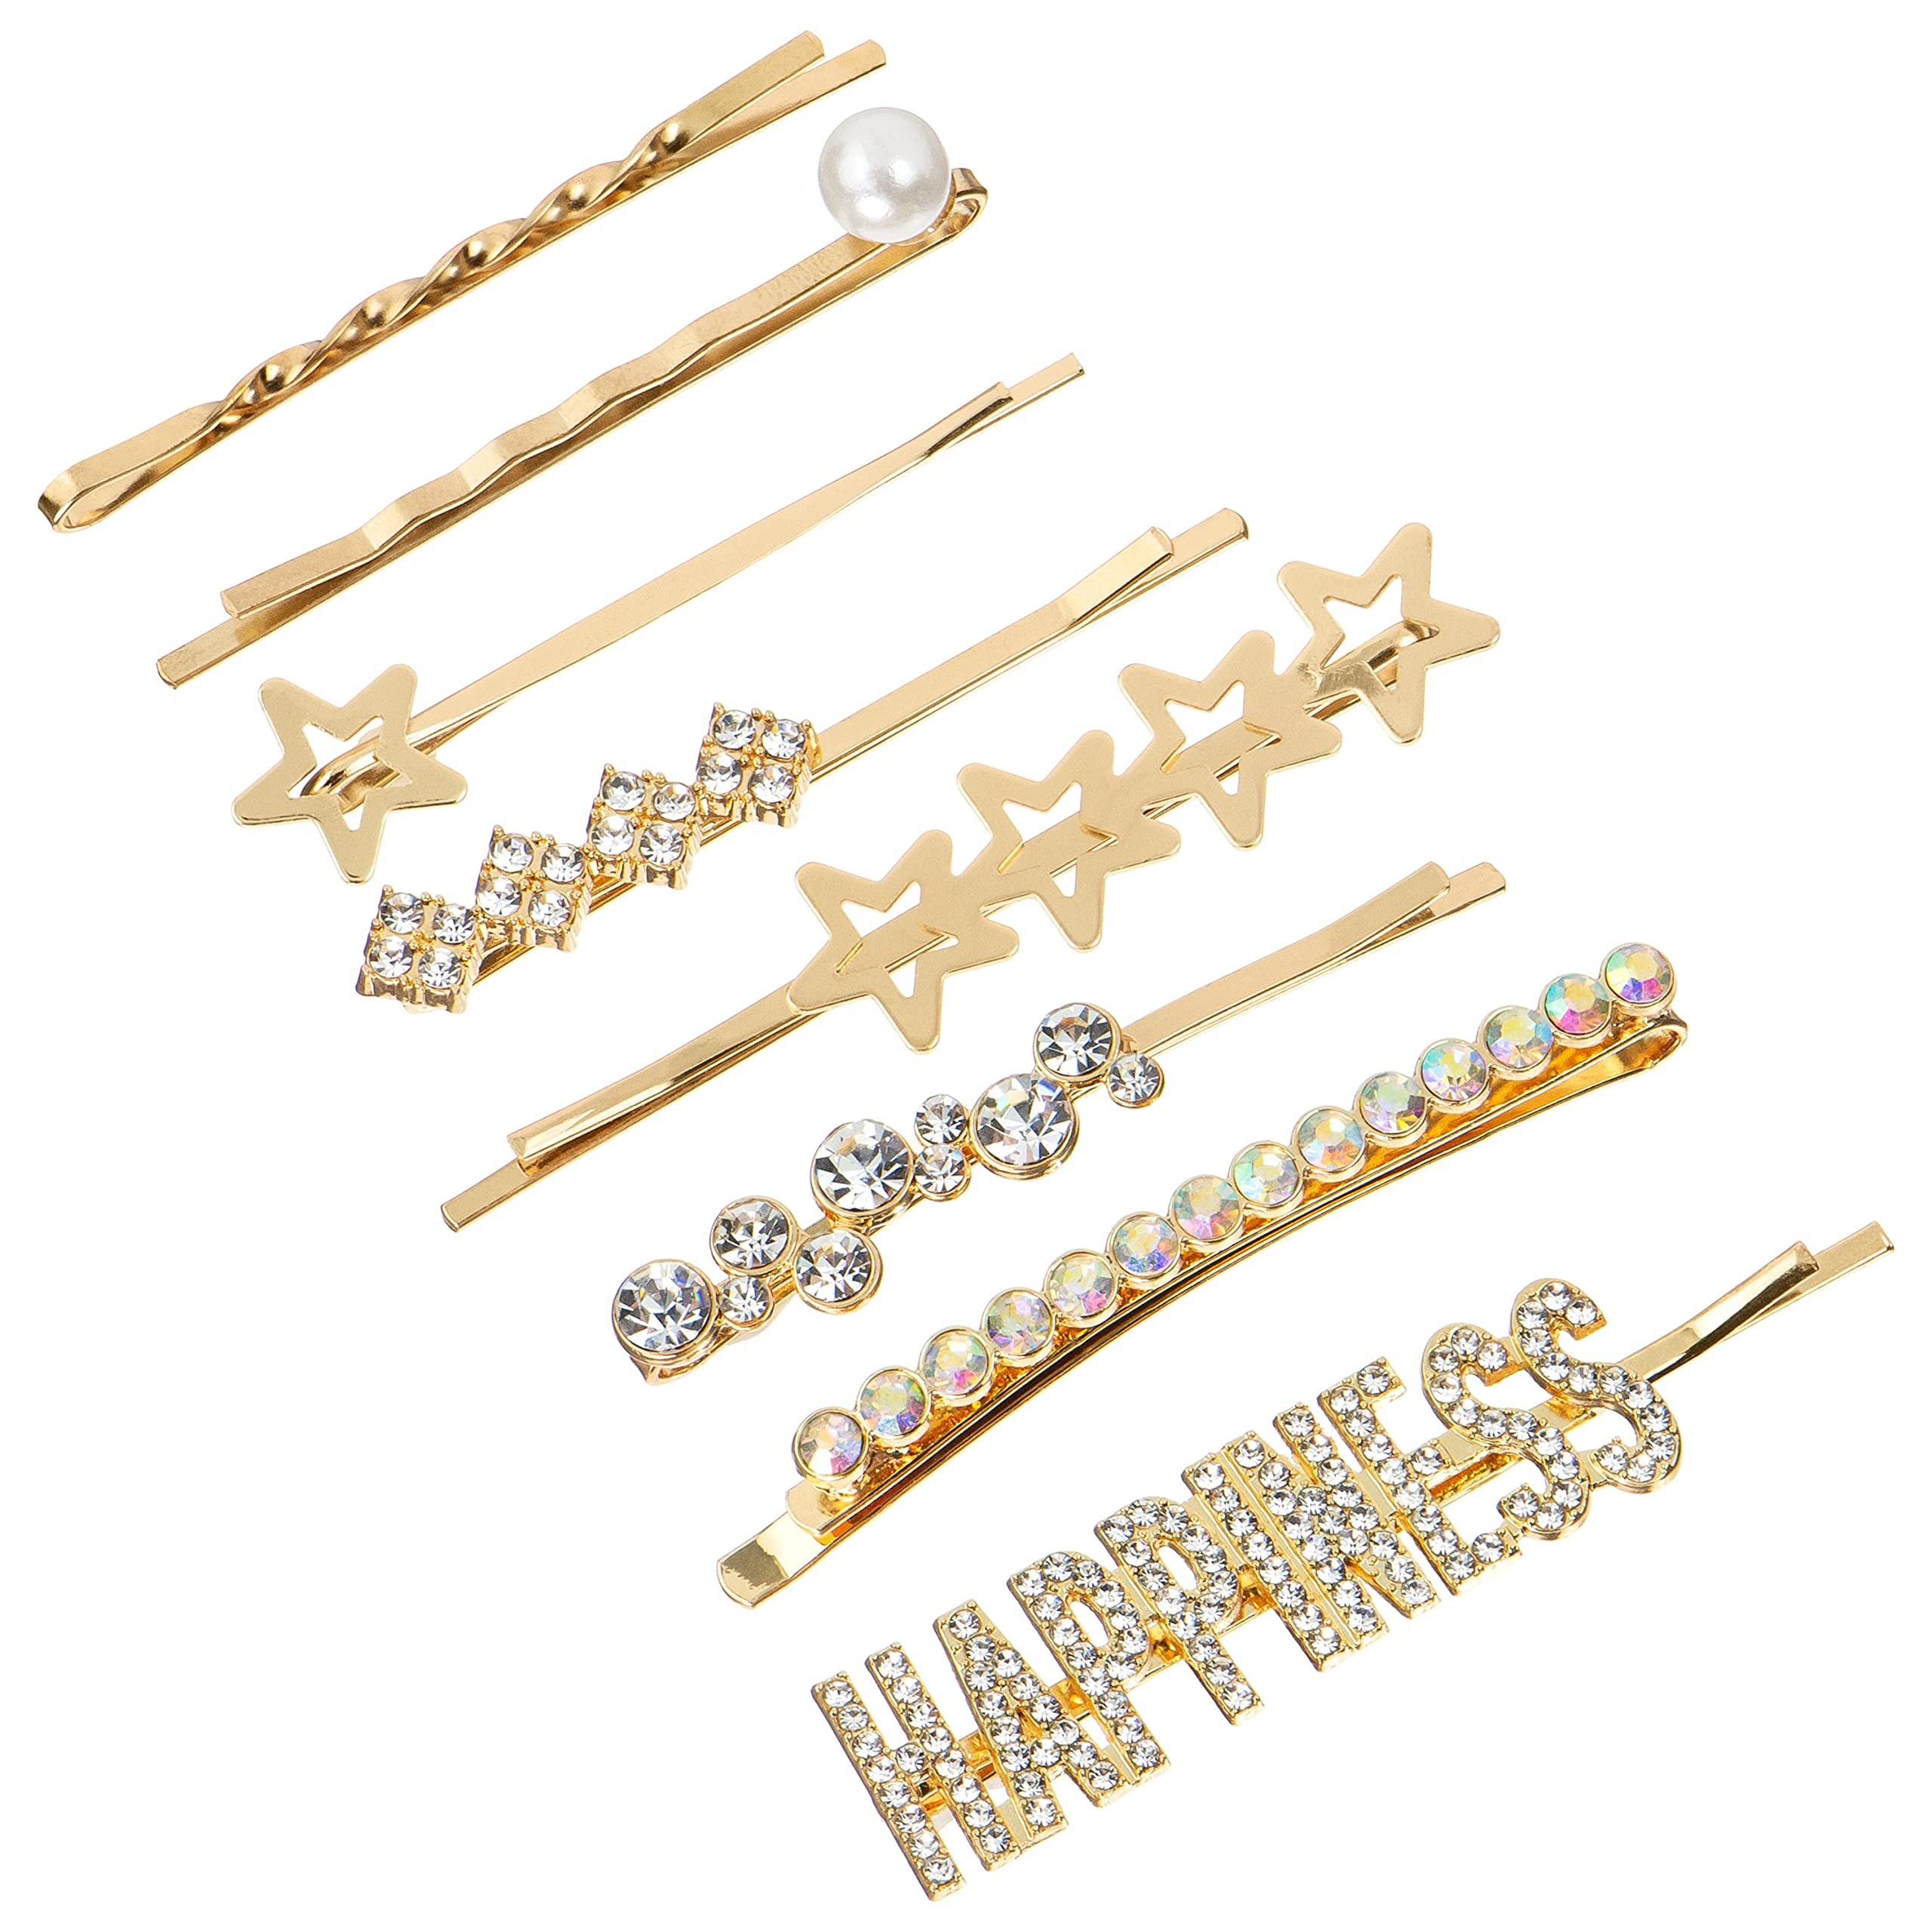 MHB Must-Have-Beauty Decorative Hair Jewelry Hair Clip Set - Hair Clips for  Styling, Bridal Hair Accessories for Women, Cute Hair Clip and Hair Styling  Accessories (8 PC HAPPINESS, STARS & RHINESTONE) 